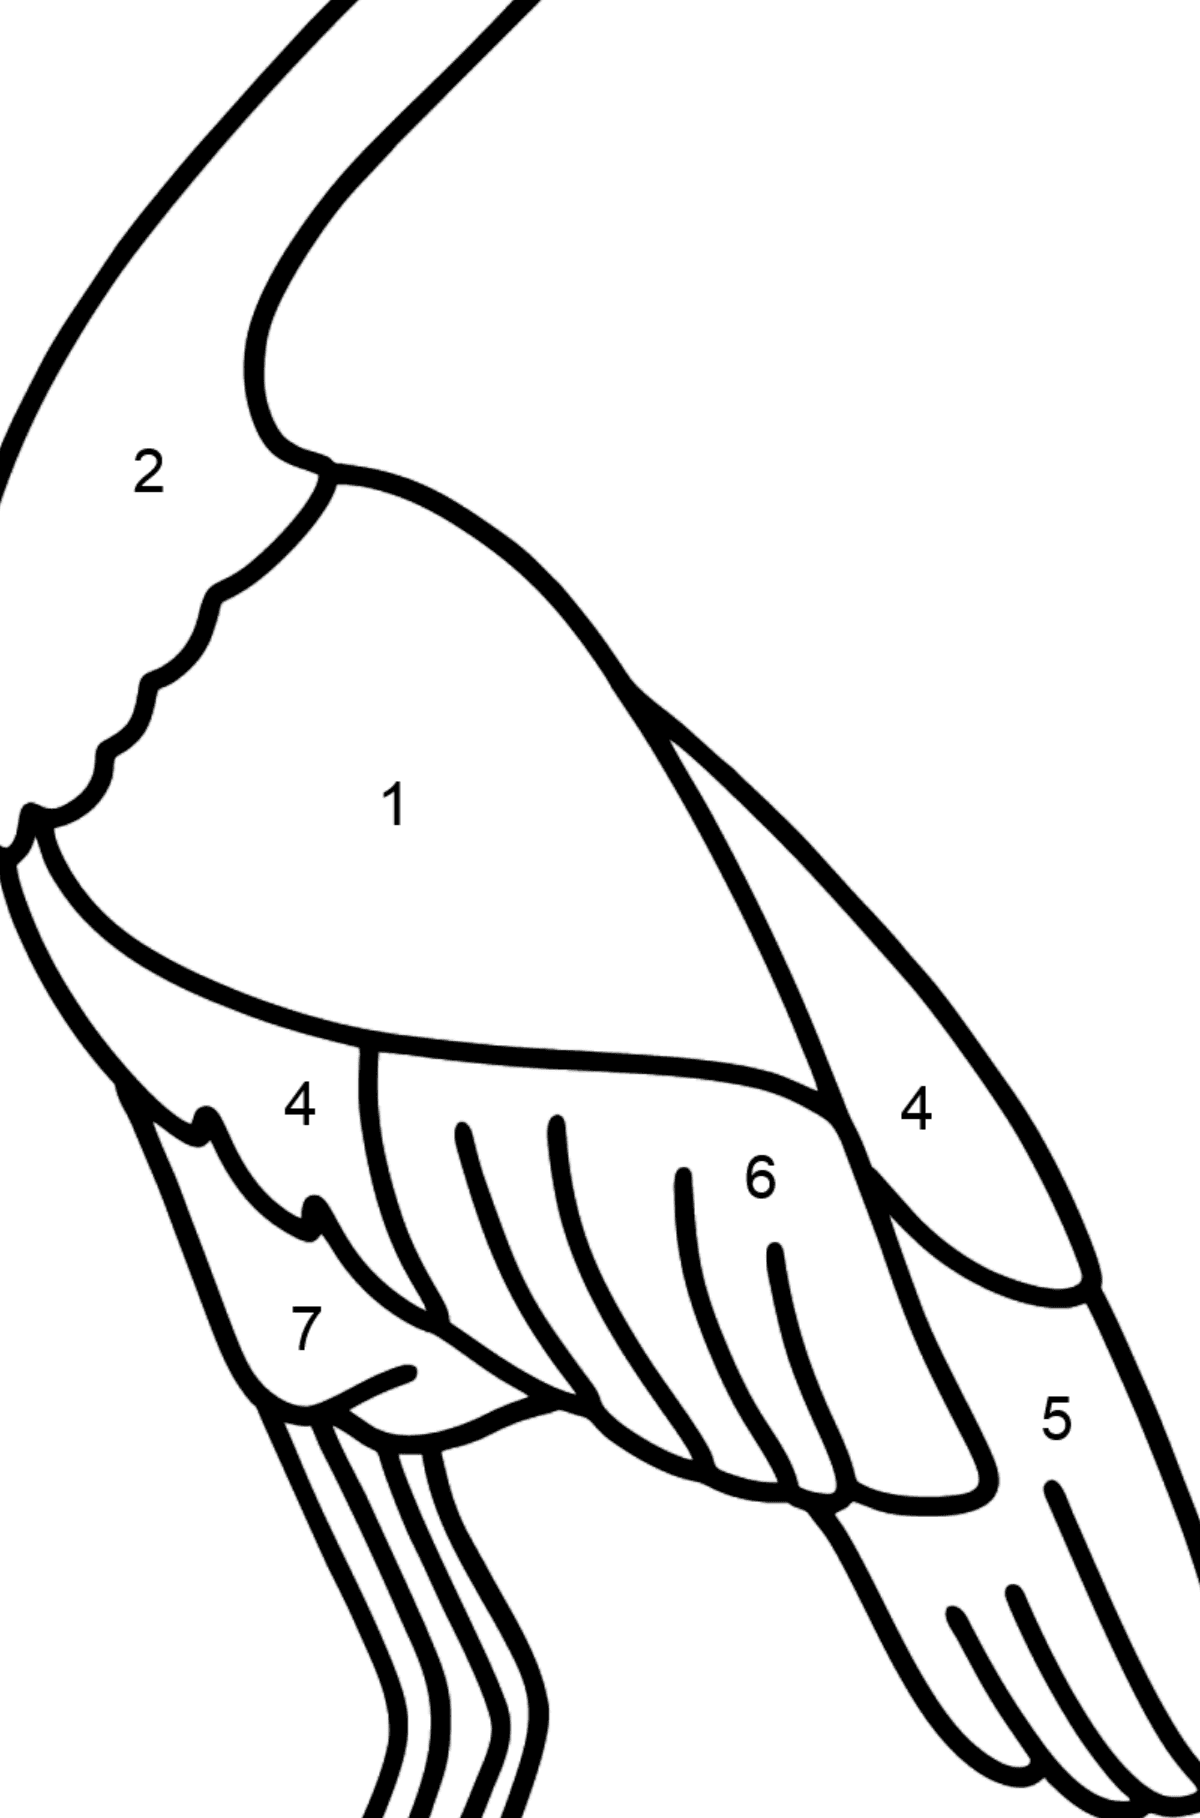 Stork coloring page - Coloring by Numbers for Kids